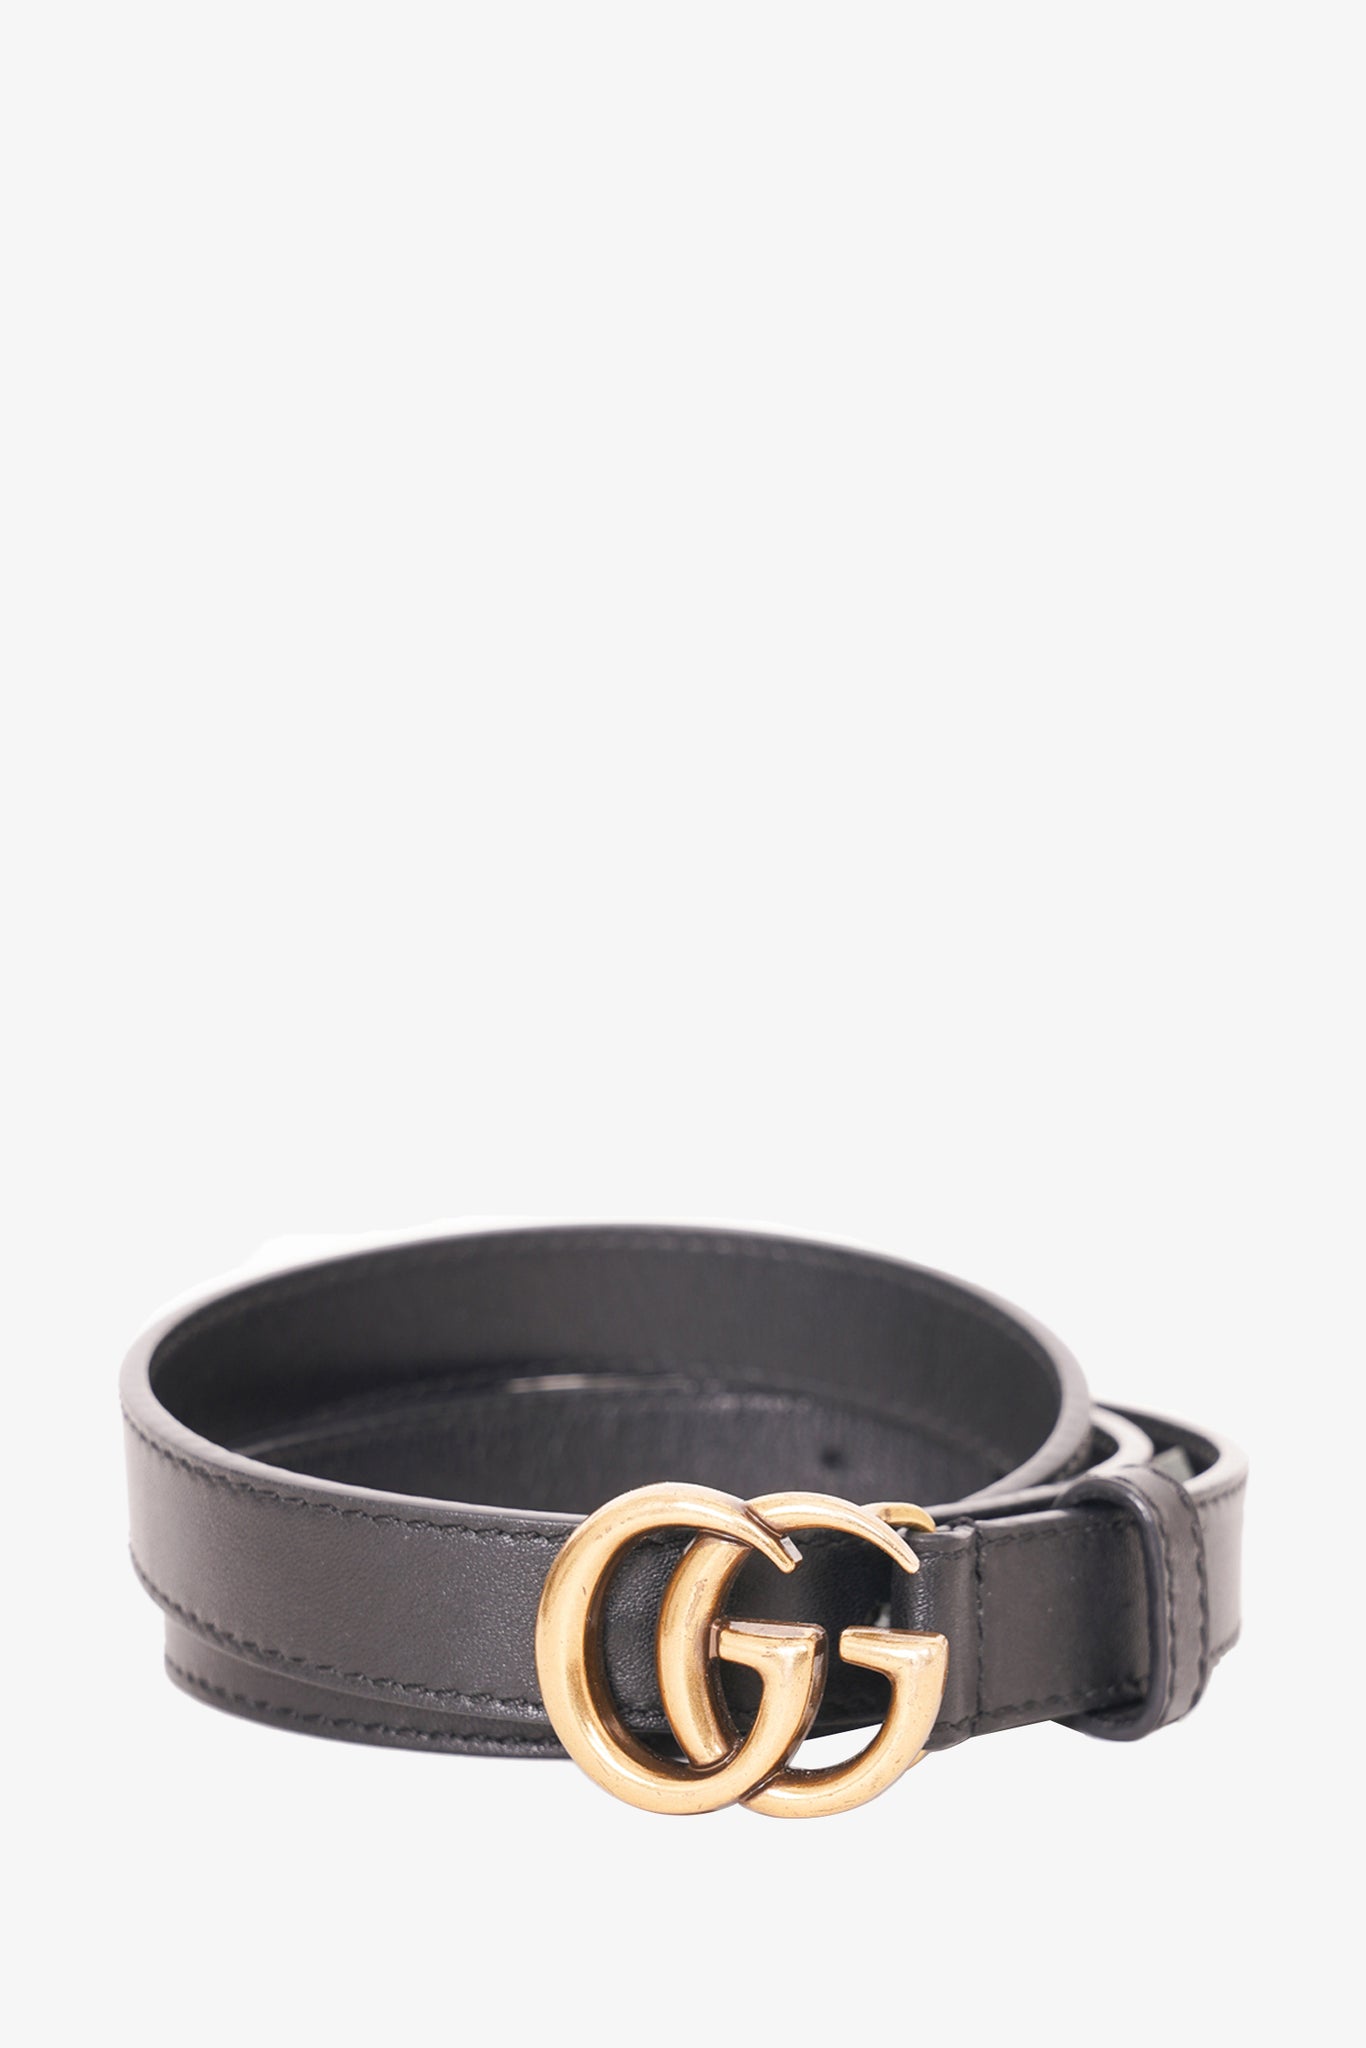 Gucci Black Leather Gold GG Marmont Belt Size 80